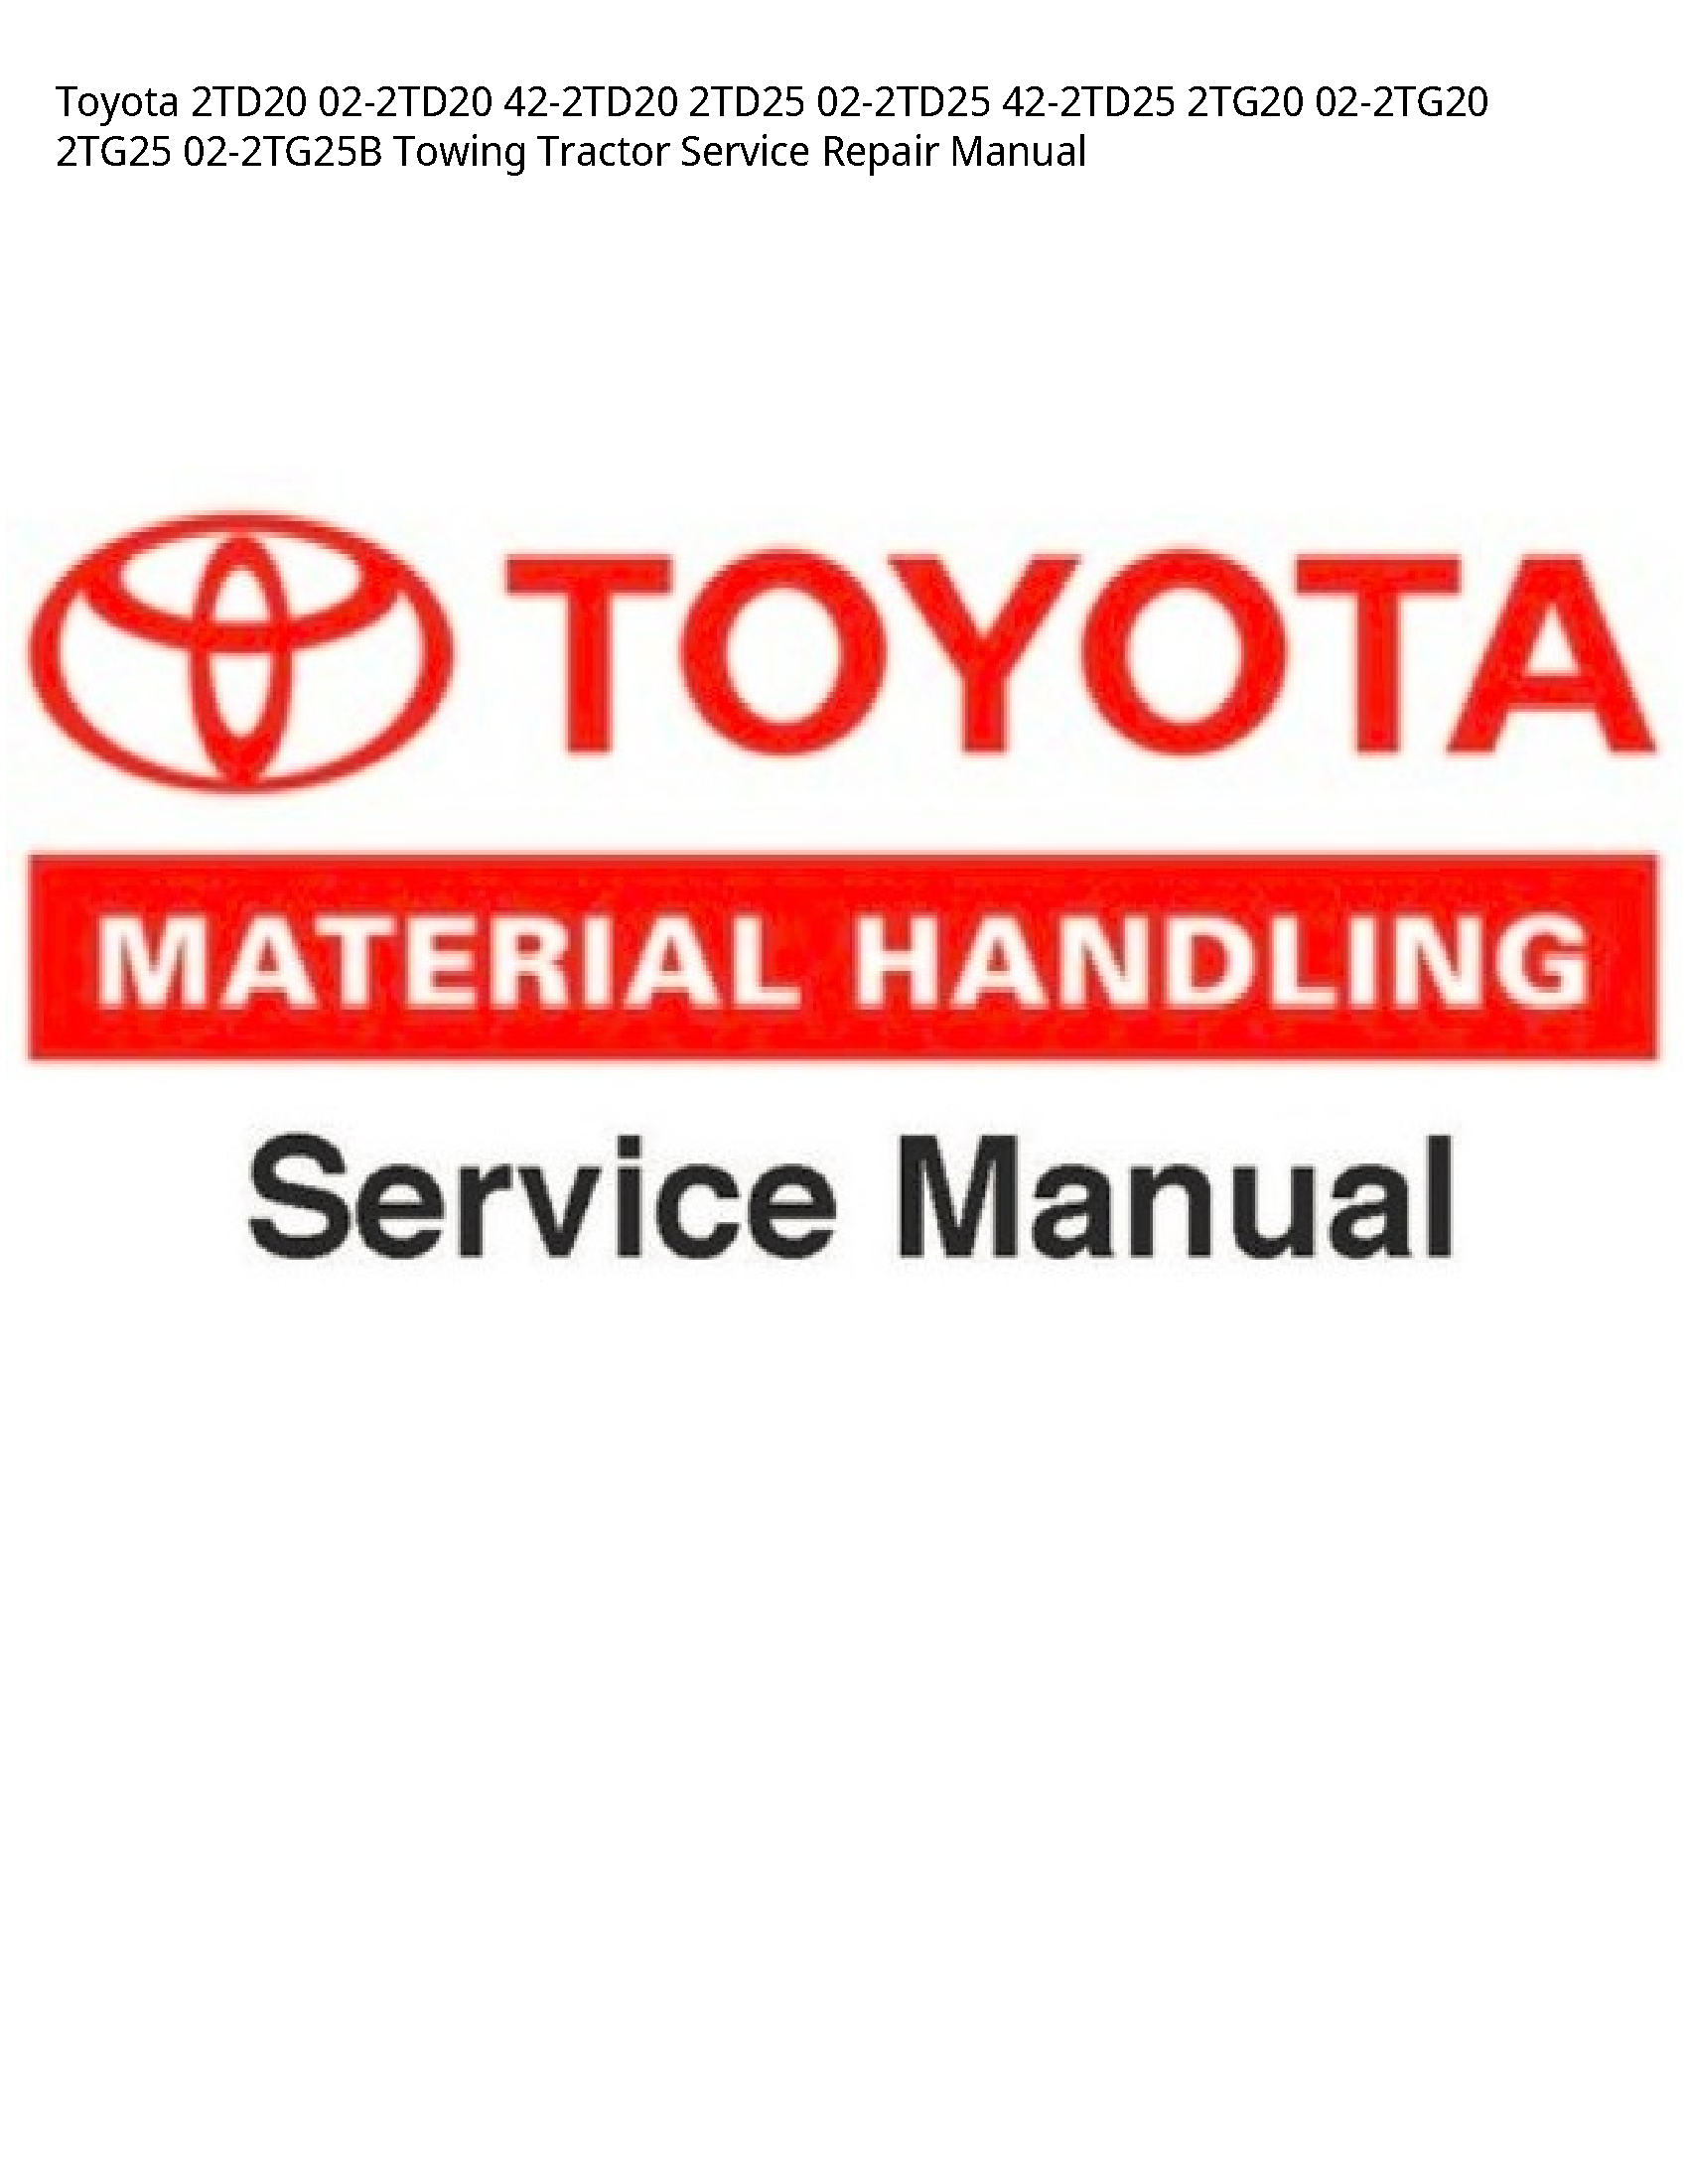 Toyota 2TD20 Towing Tractor manual